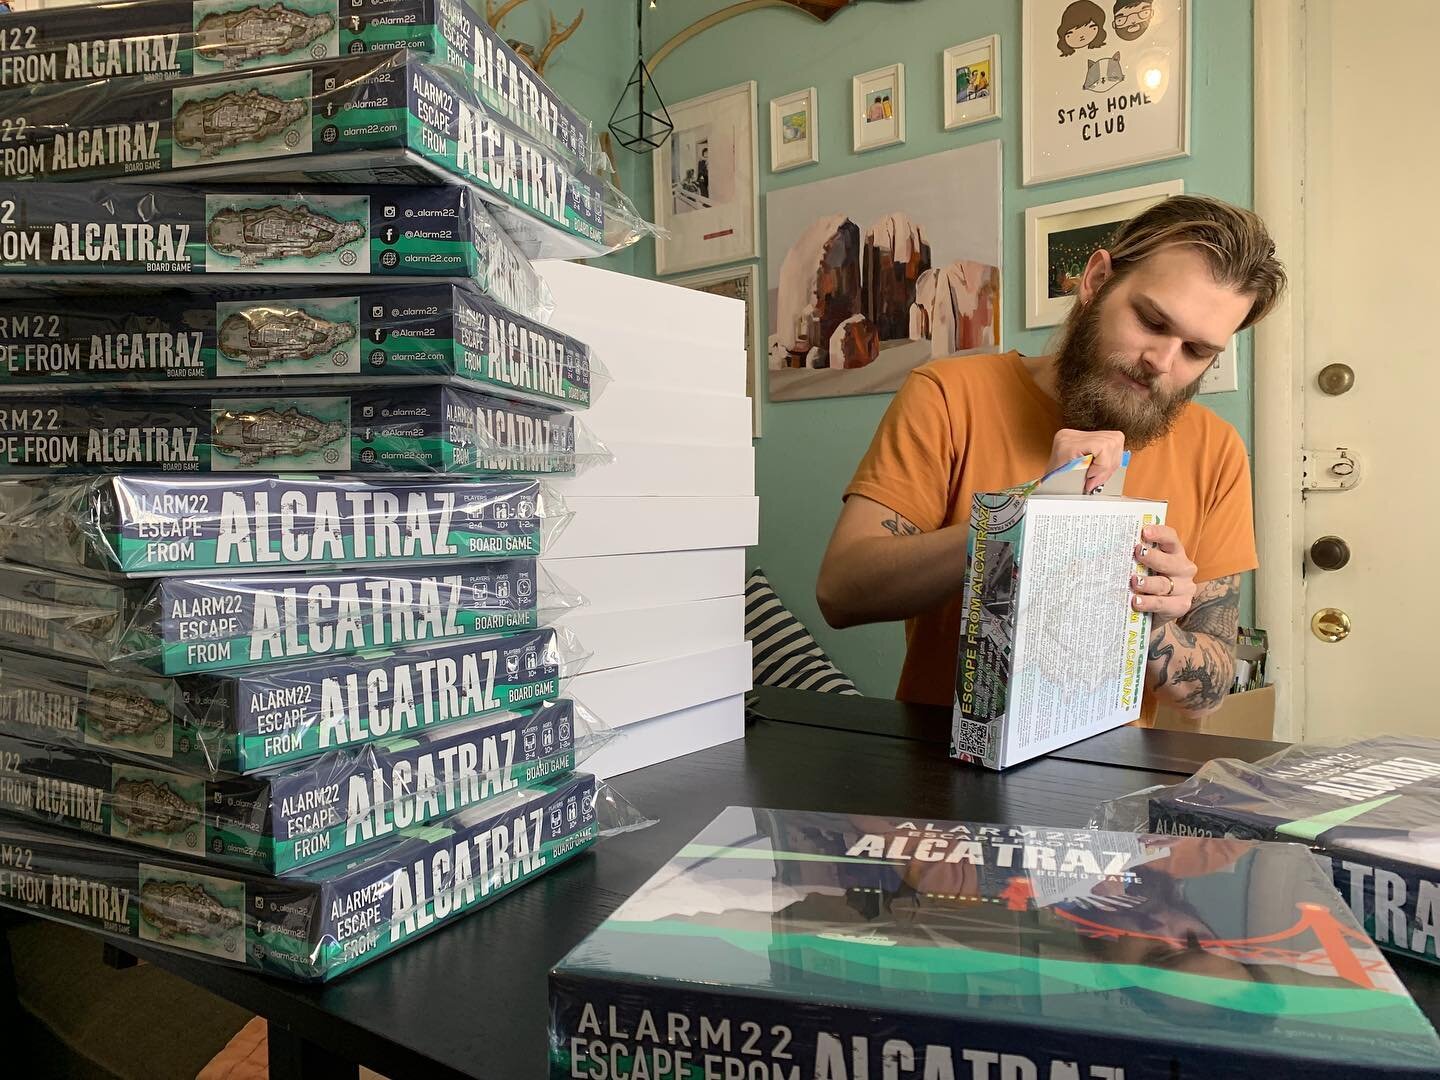 Home is where the heart is. It&rsquo;s also where we pack, seal, ship, post, message, and most importantly play Alarm 22 Escape From Alcatraz. Thanks to everyone who shops small business! 

#alarm22 #alcatraz #boardgames #smallbusiness #gamedev #shop